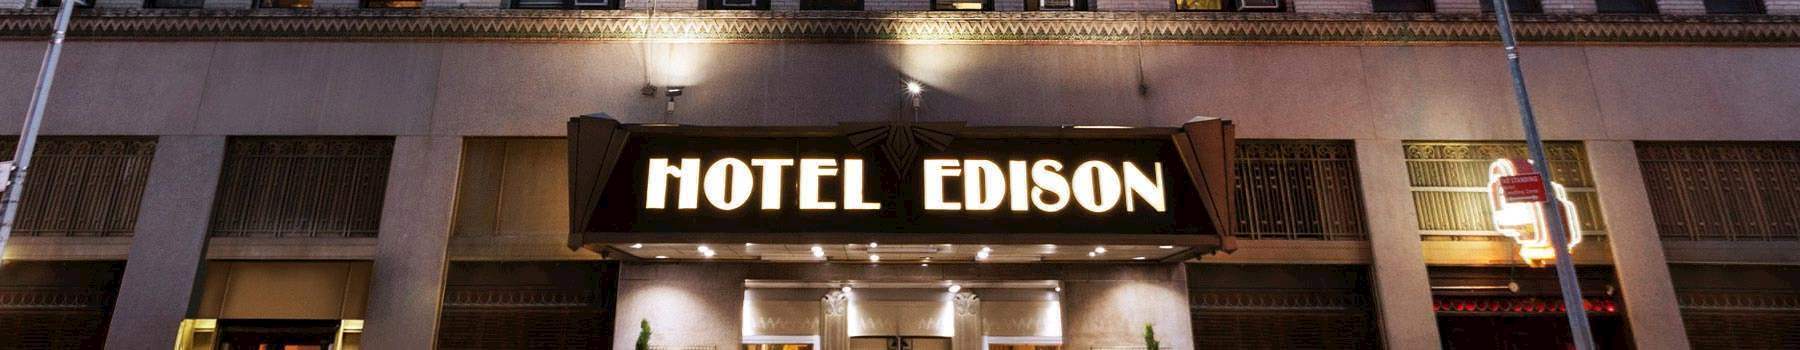 The Show Must Go On! - hotel edison